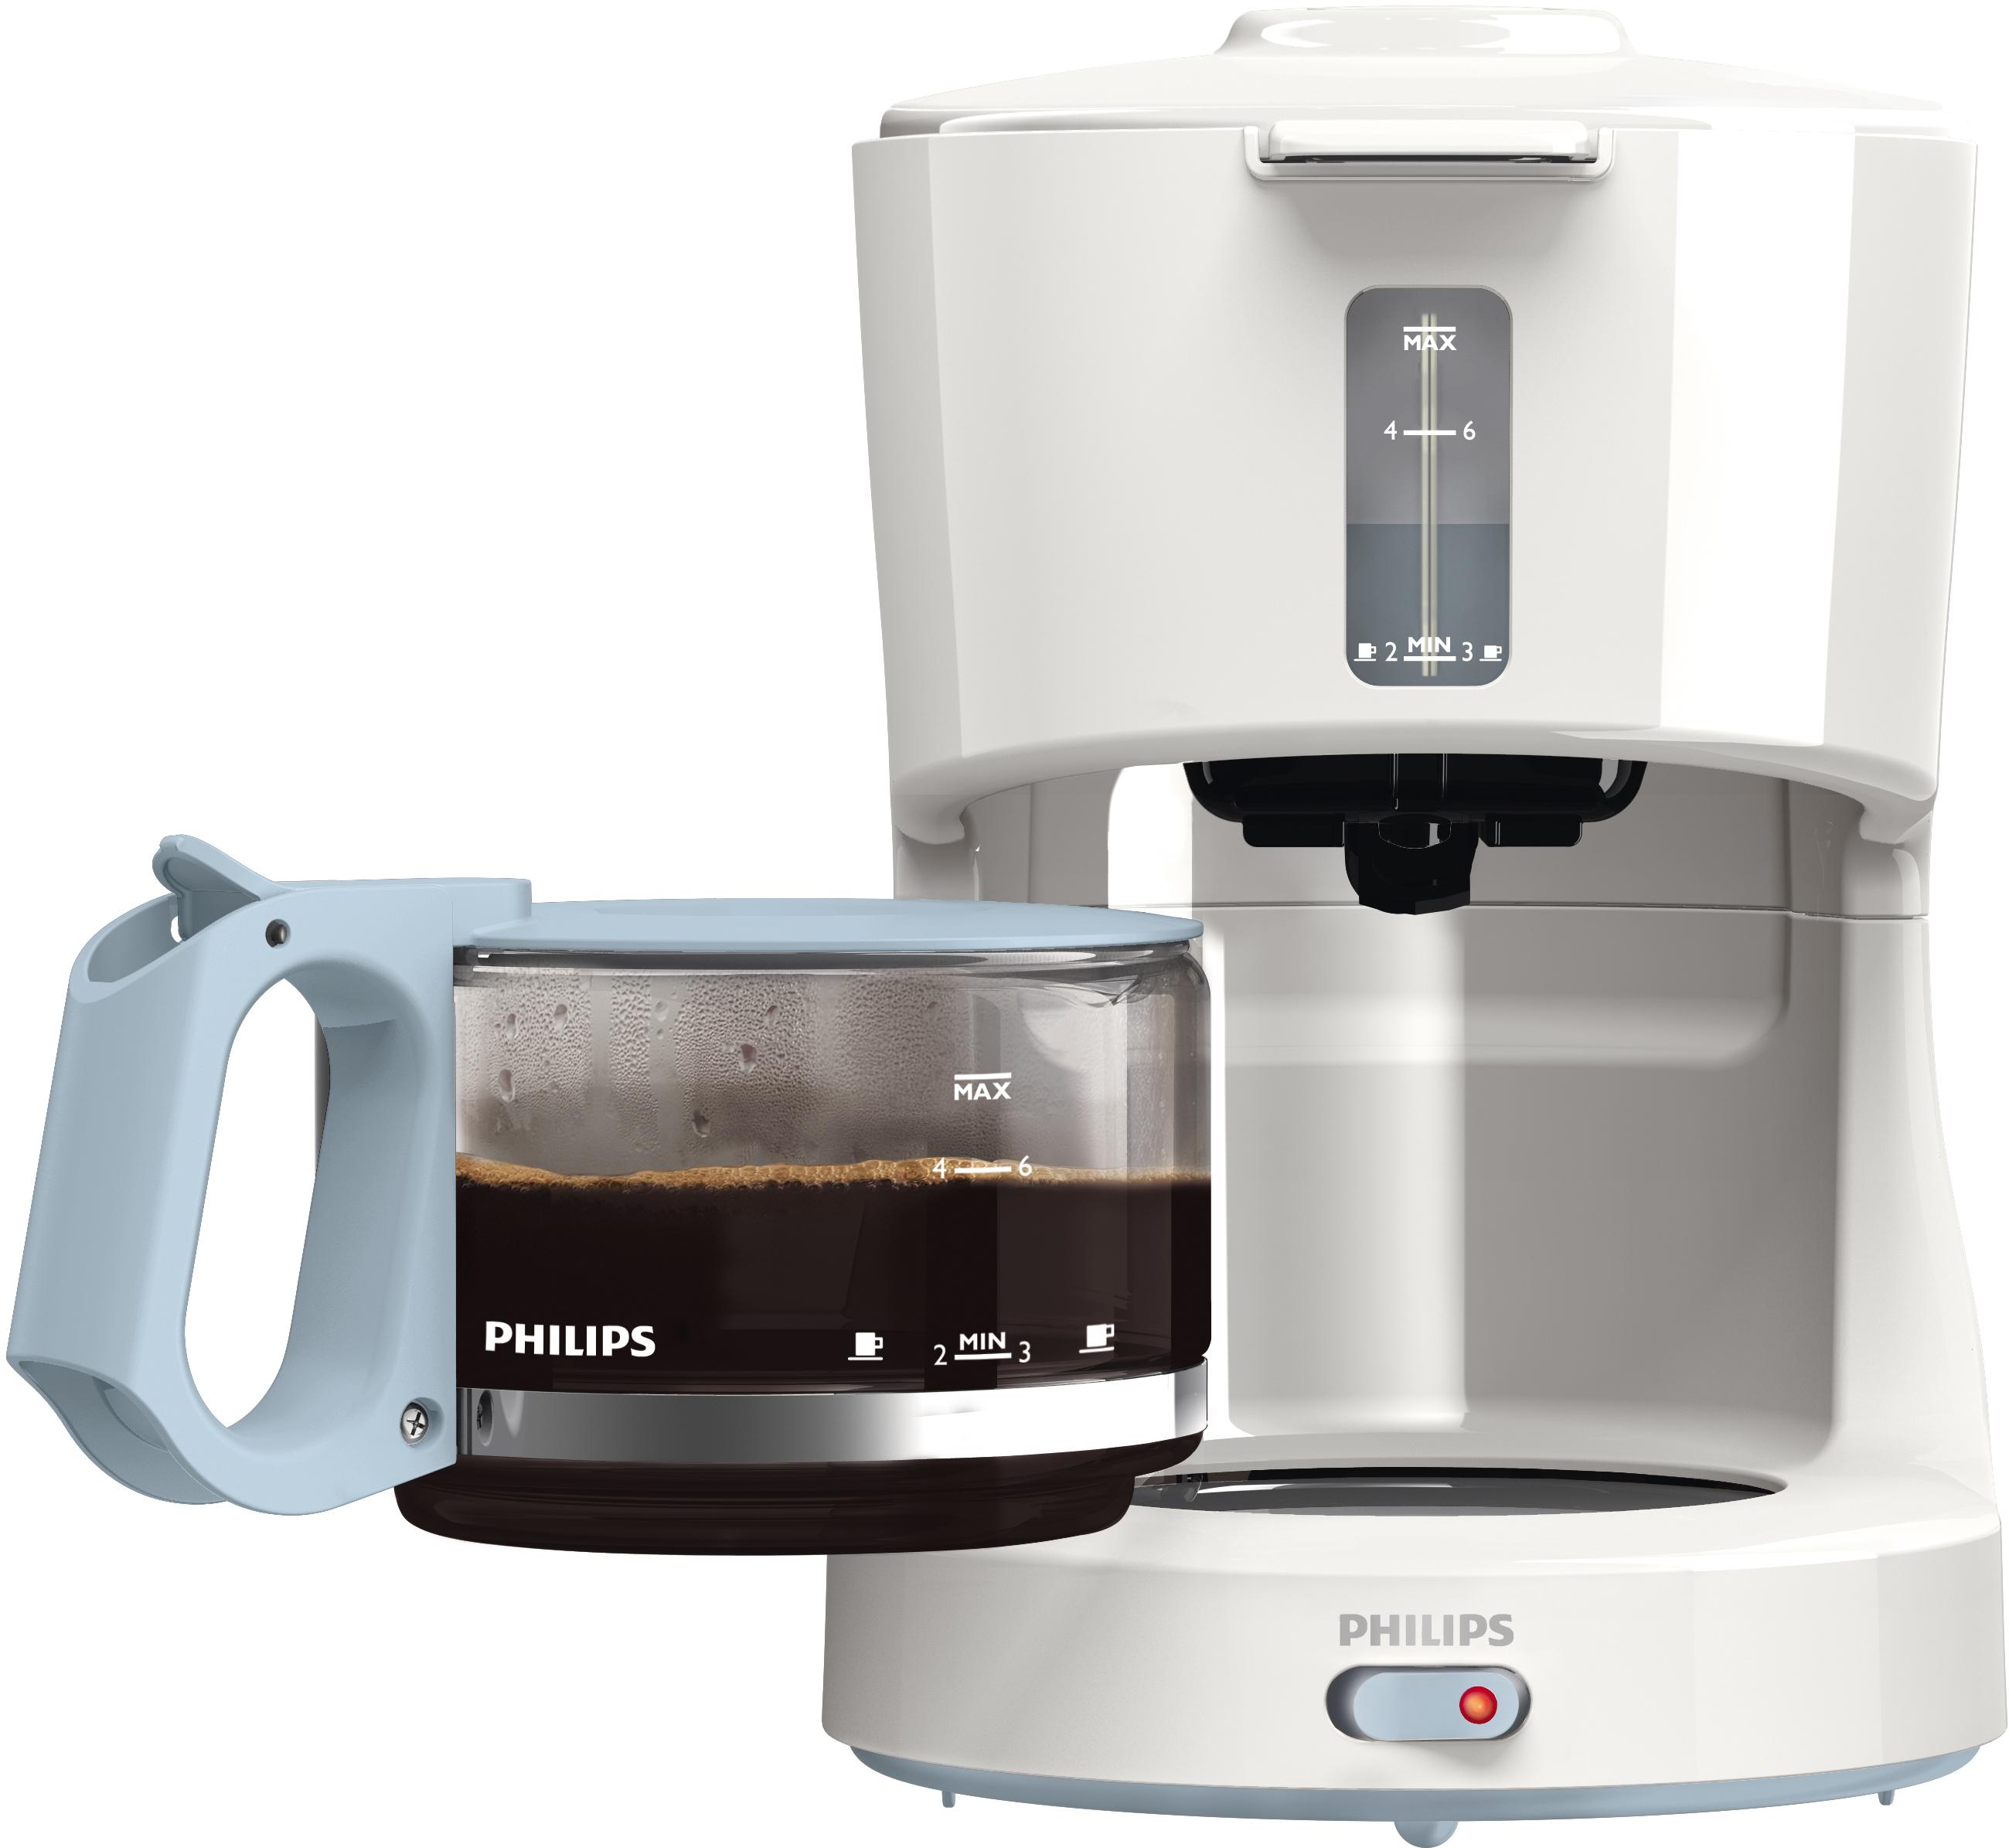 https://www.220stores.com/resize/Shared/Images/Product/Philips-220-Volt-6-Cup-Coffee-Maker/HD2.jpg?